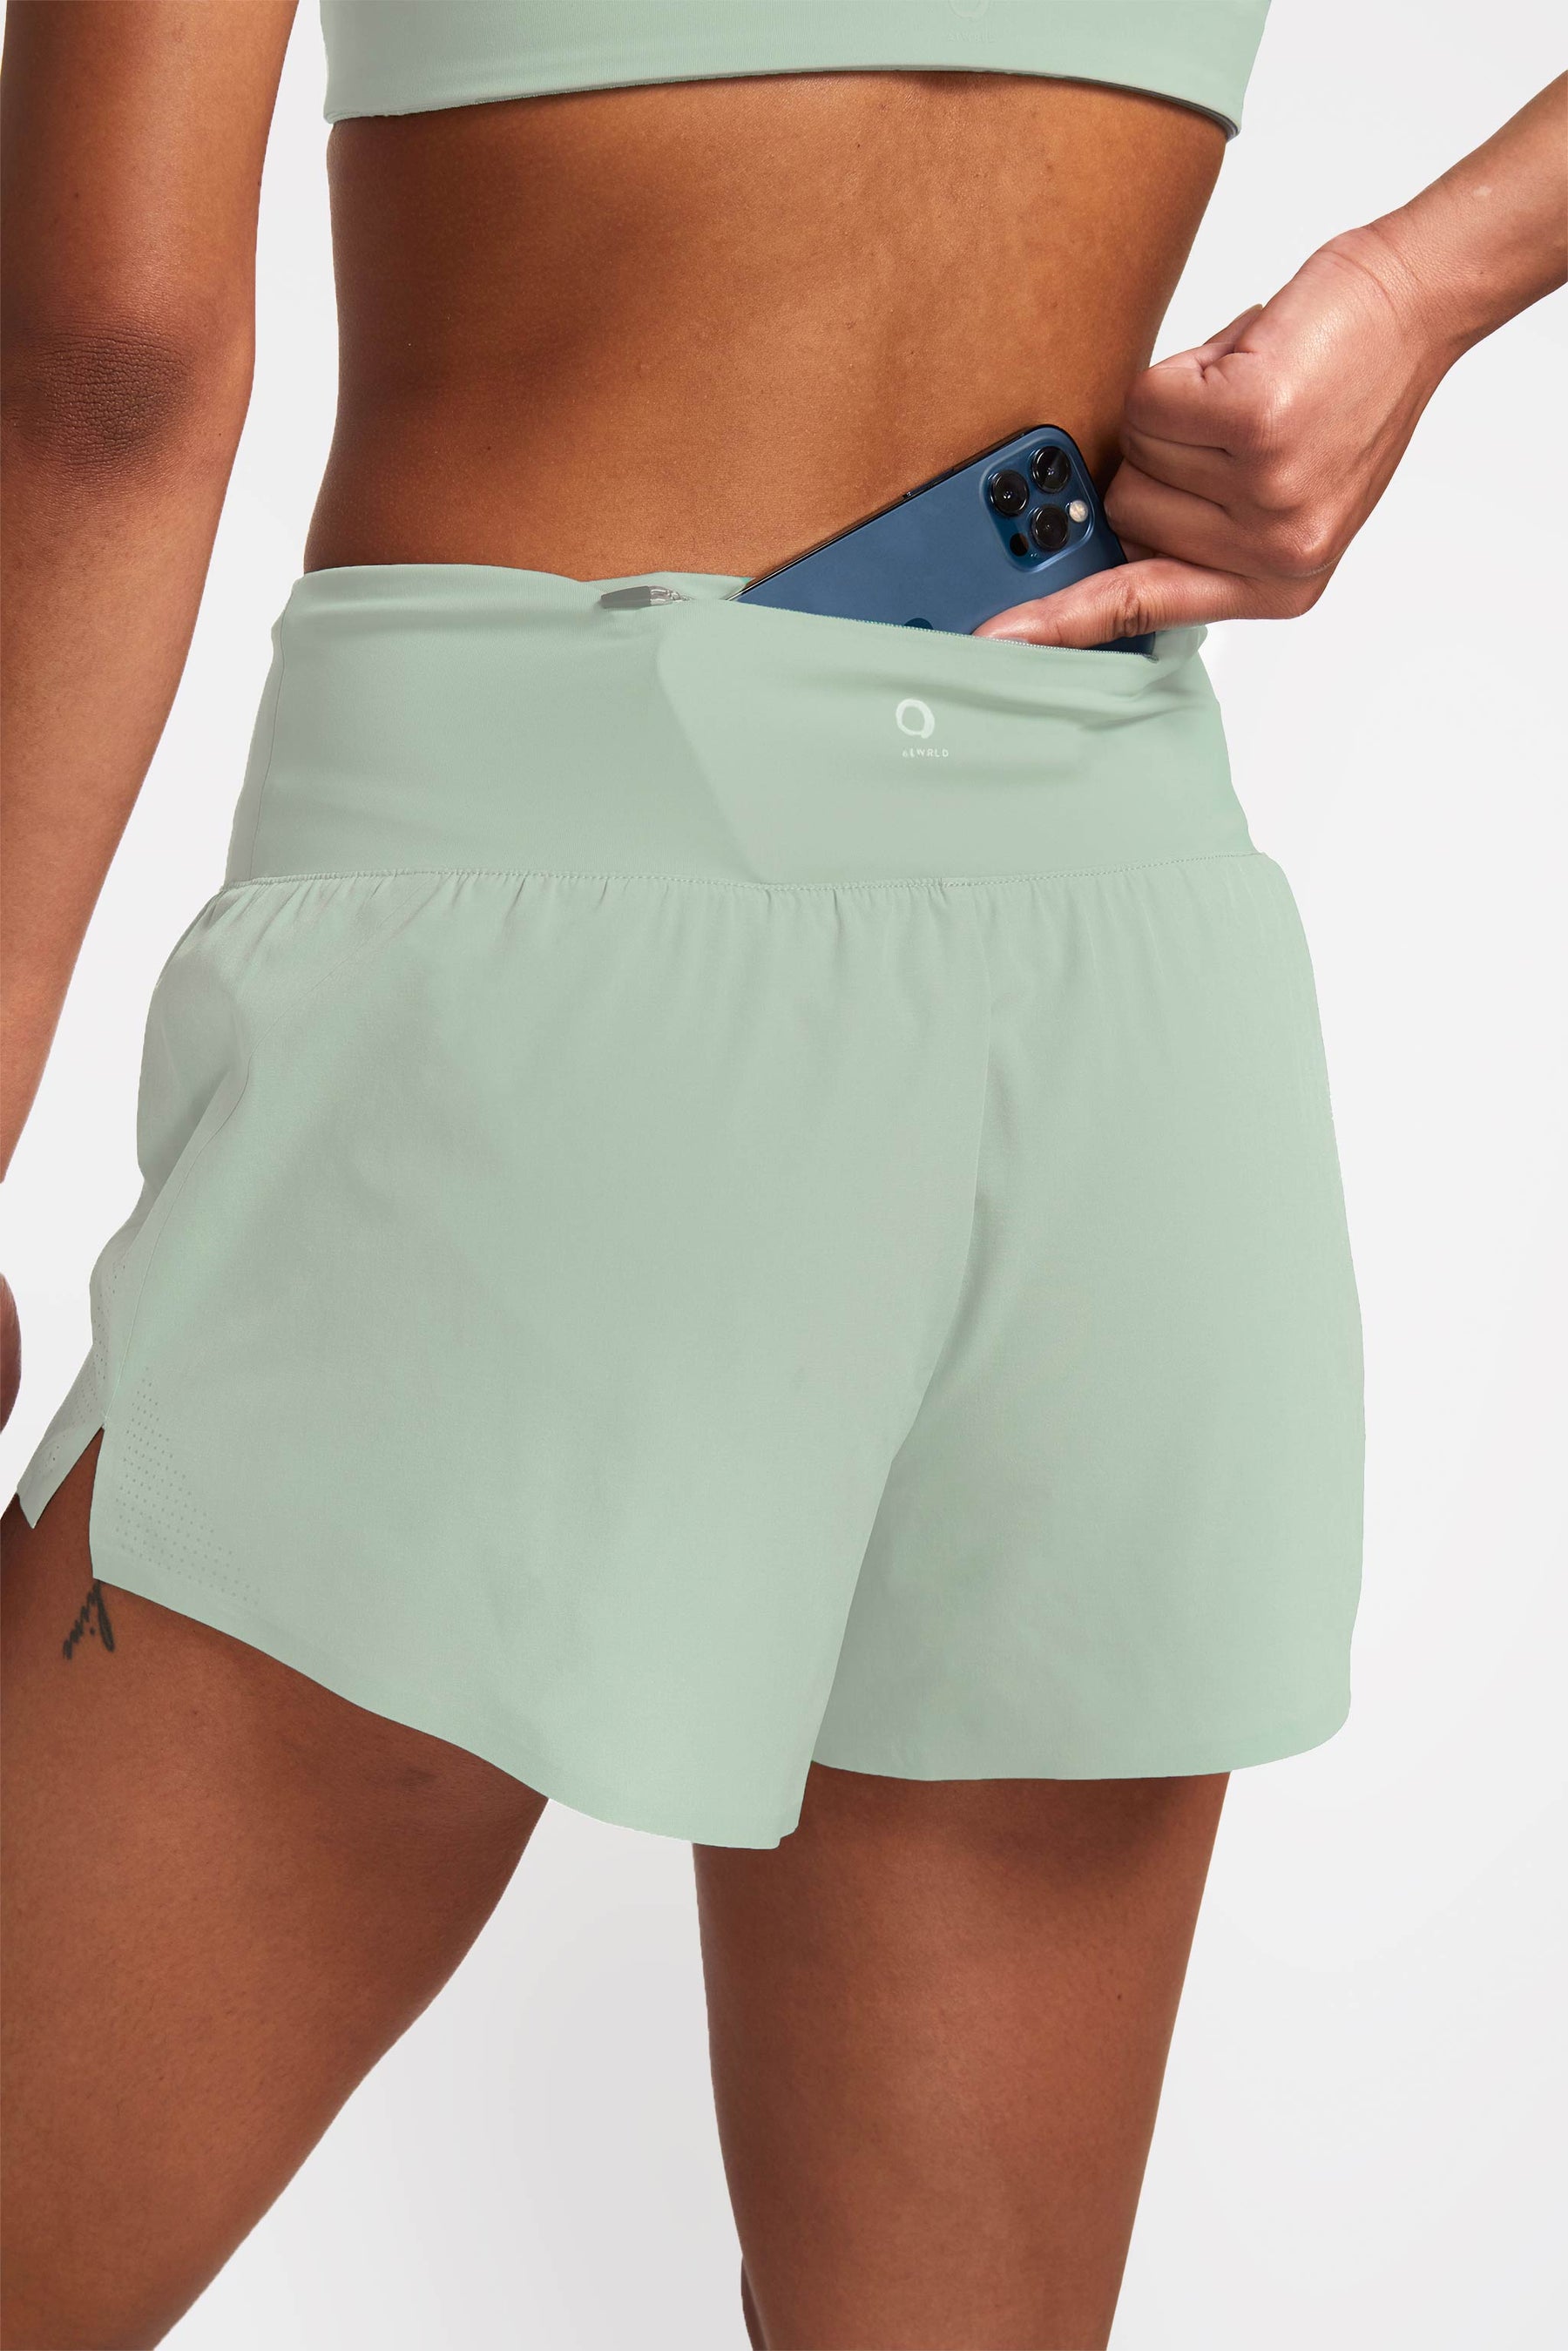 Back view of athletic running shorts with pocket in waistband that fits a cell phone